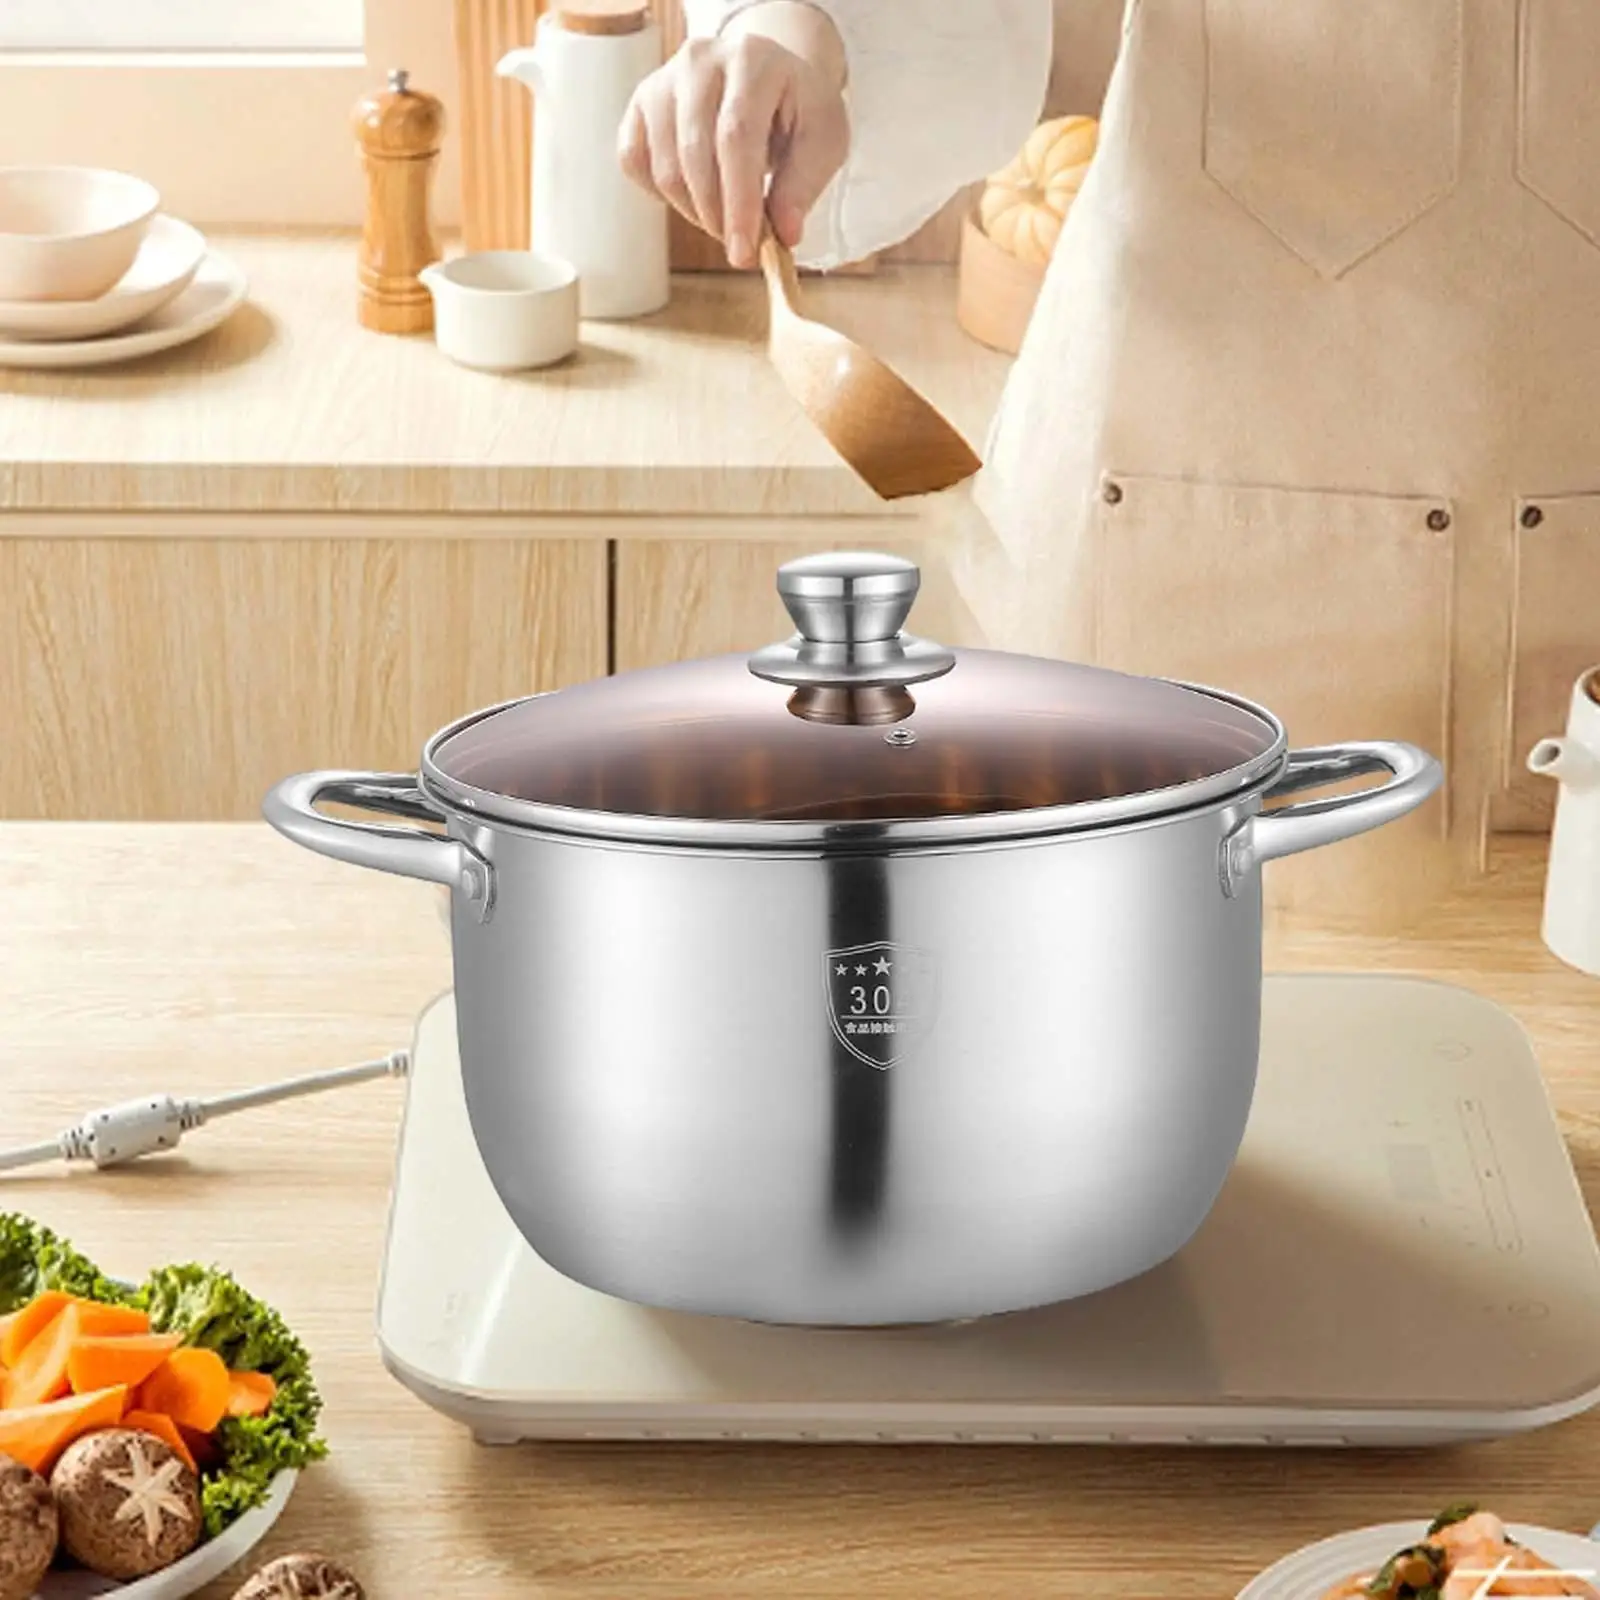 Stainless Steel Stockpot with Lid Universal Base Double Handle Non Stick Soup Pot for Warming Milk Soup Sauce Vegetables Noodles